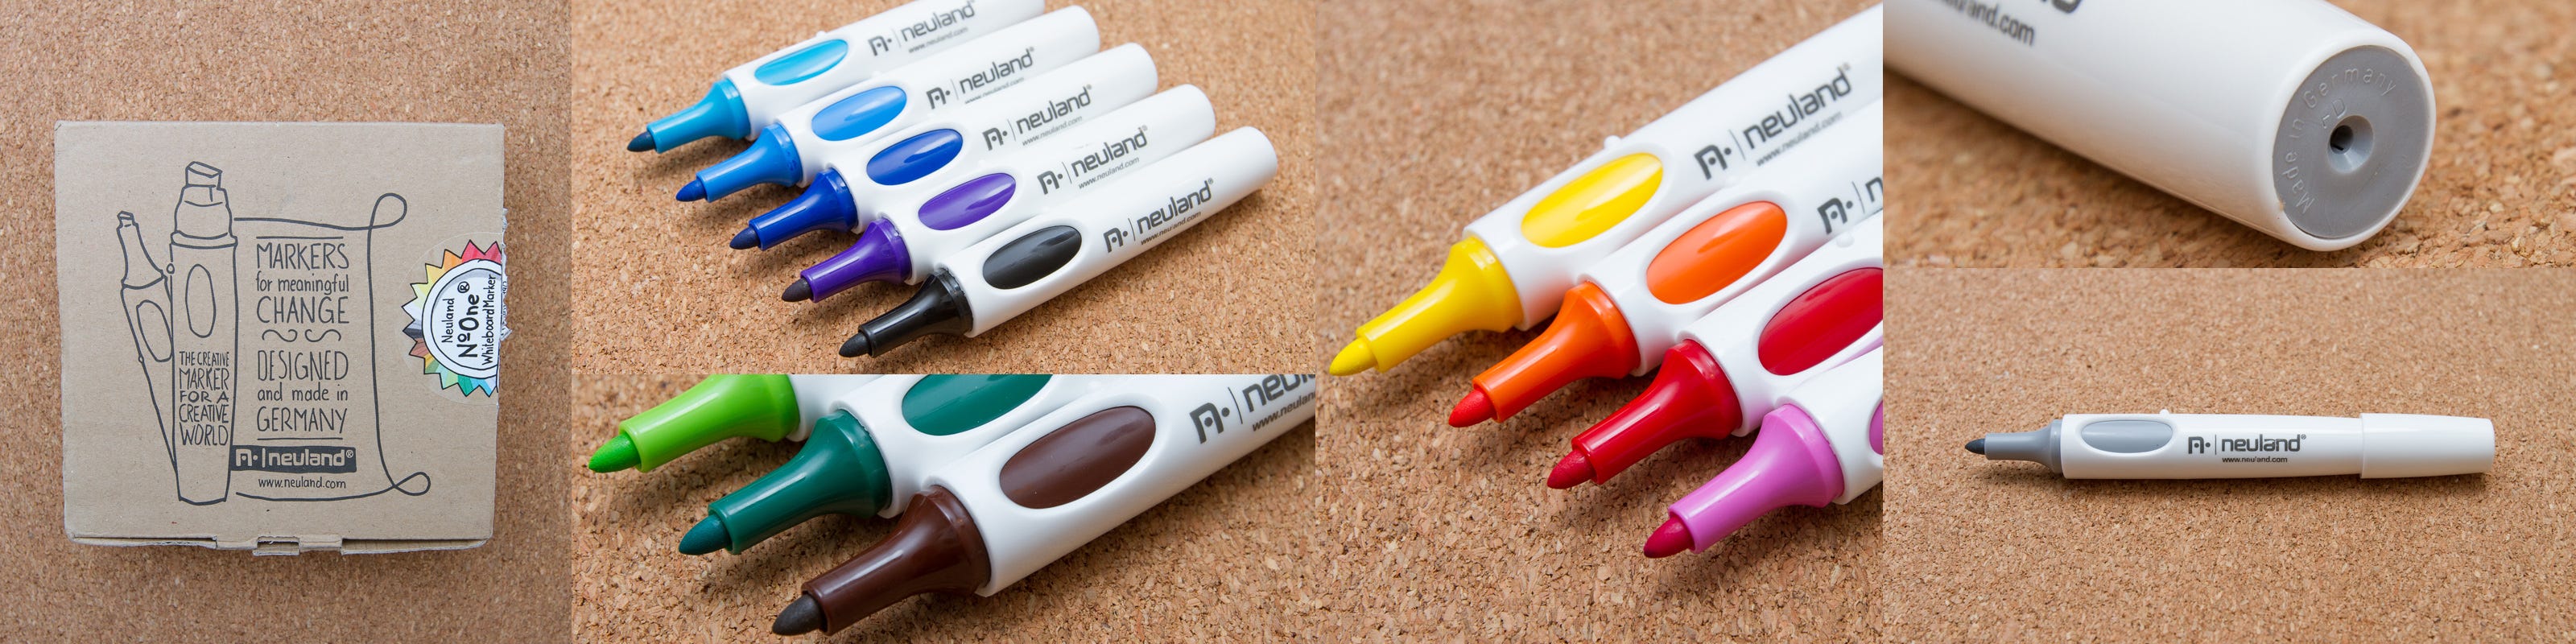 All you need to know about whiteboard markers ...